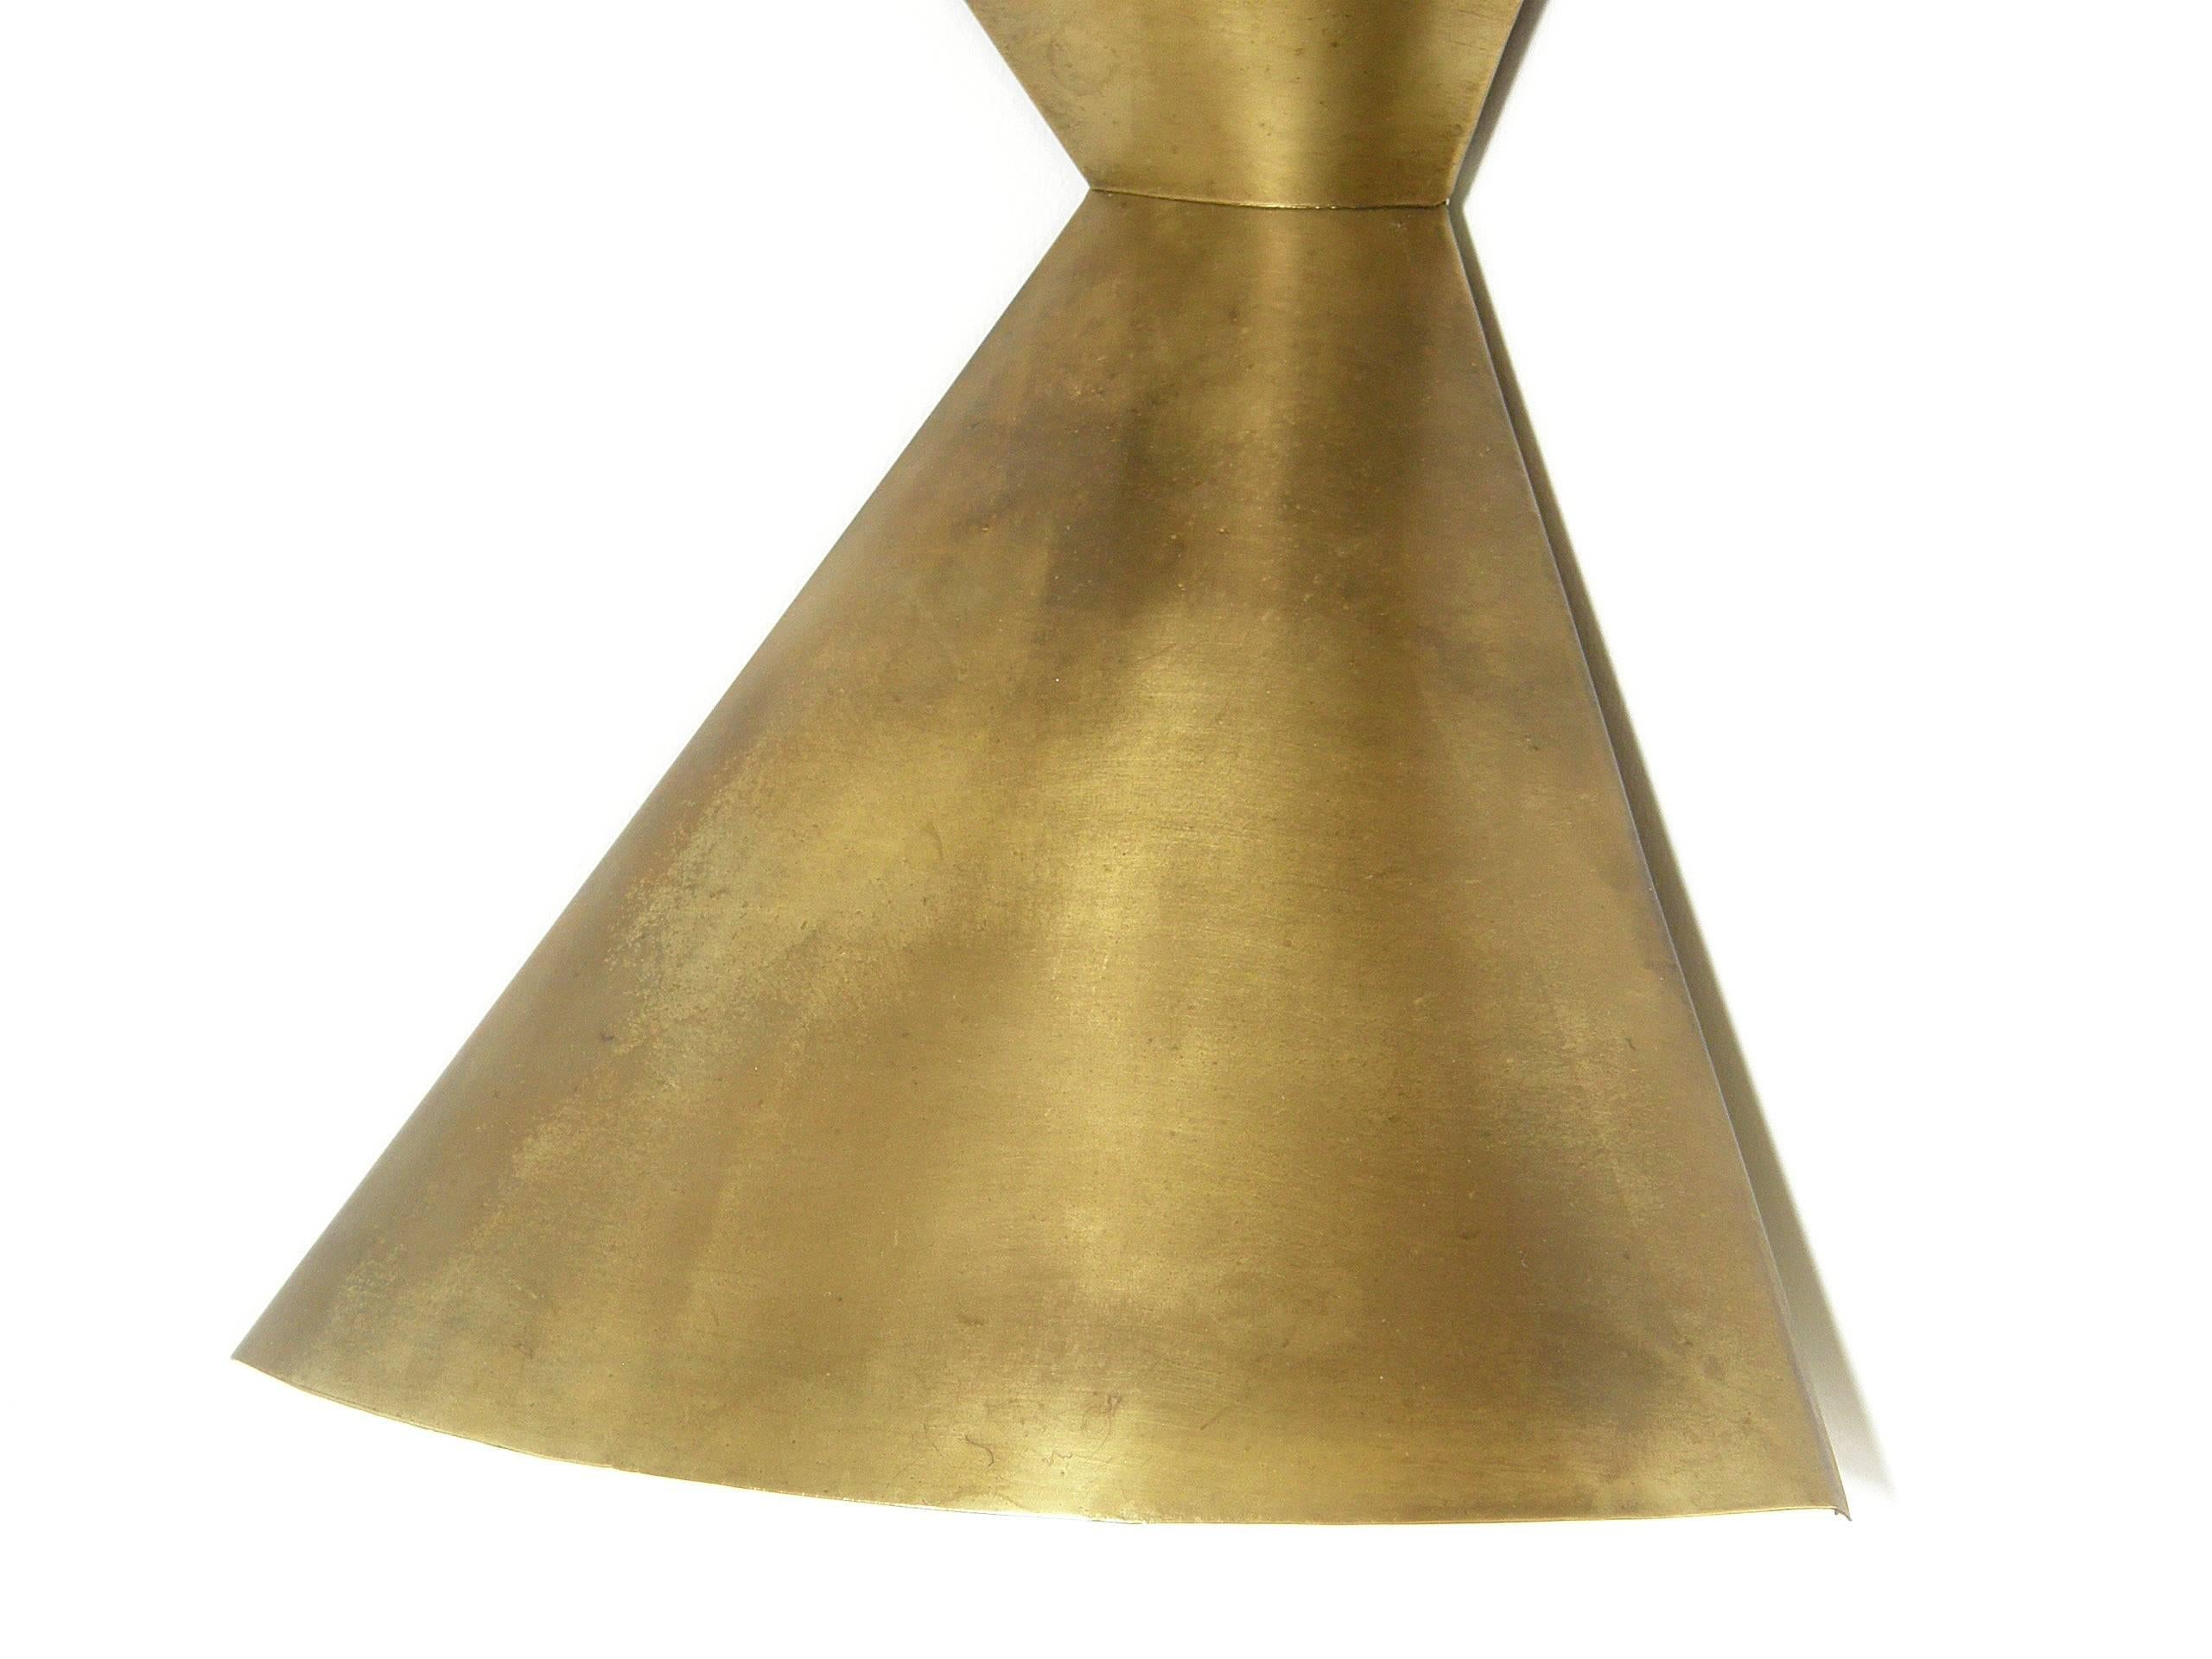 Edward Wormley Brass Corner Lamps for Lightolier with Upward and Downward Light 2